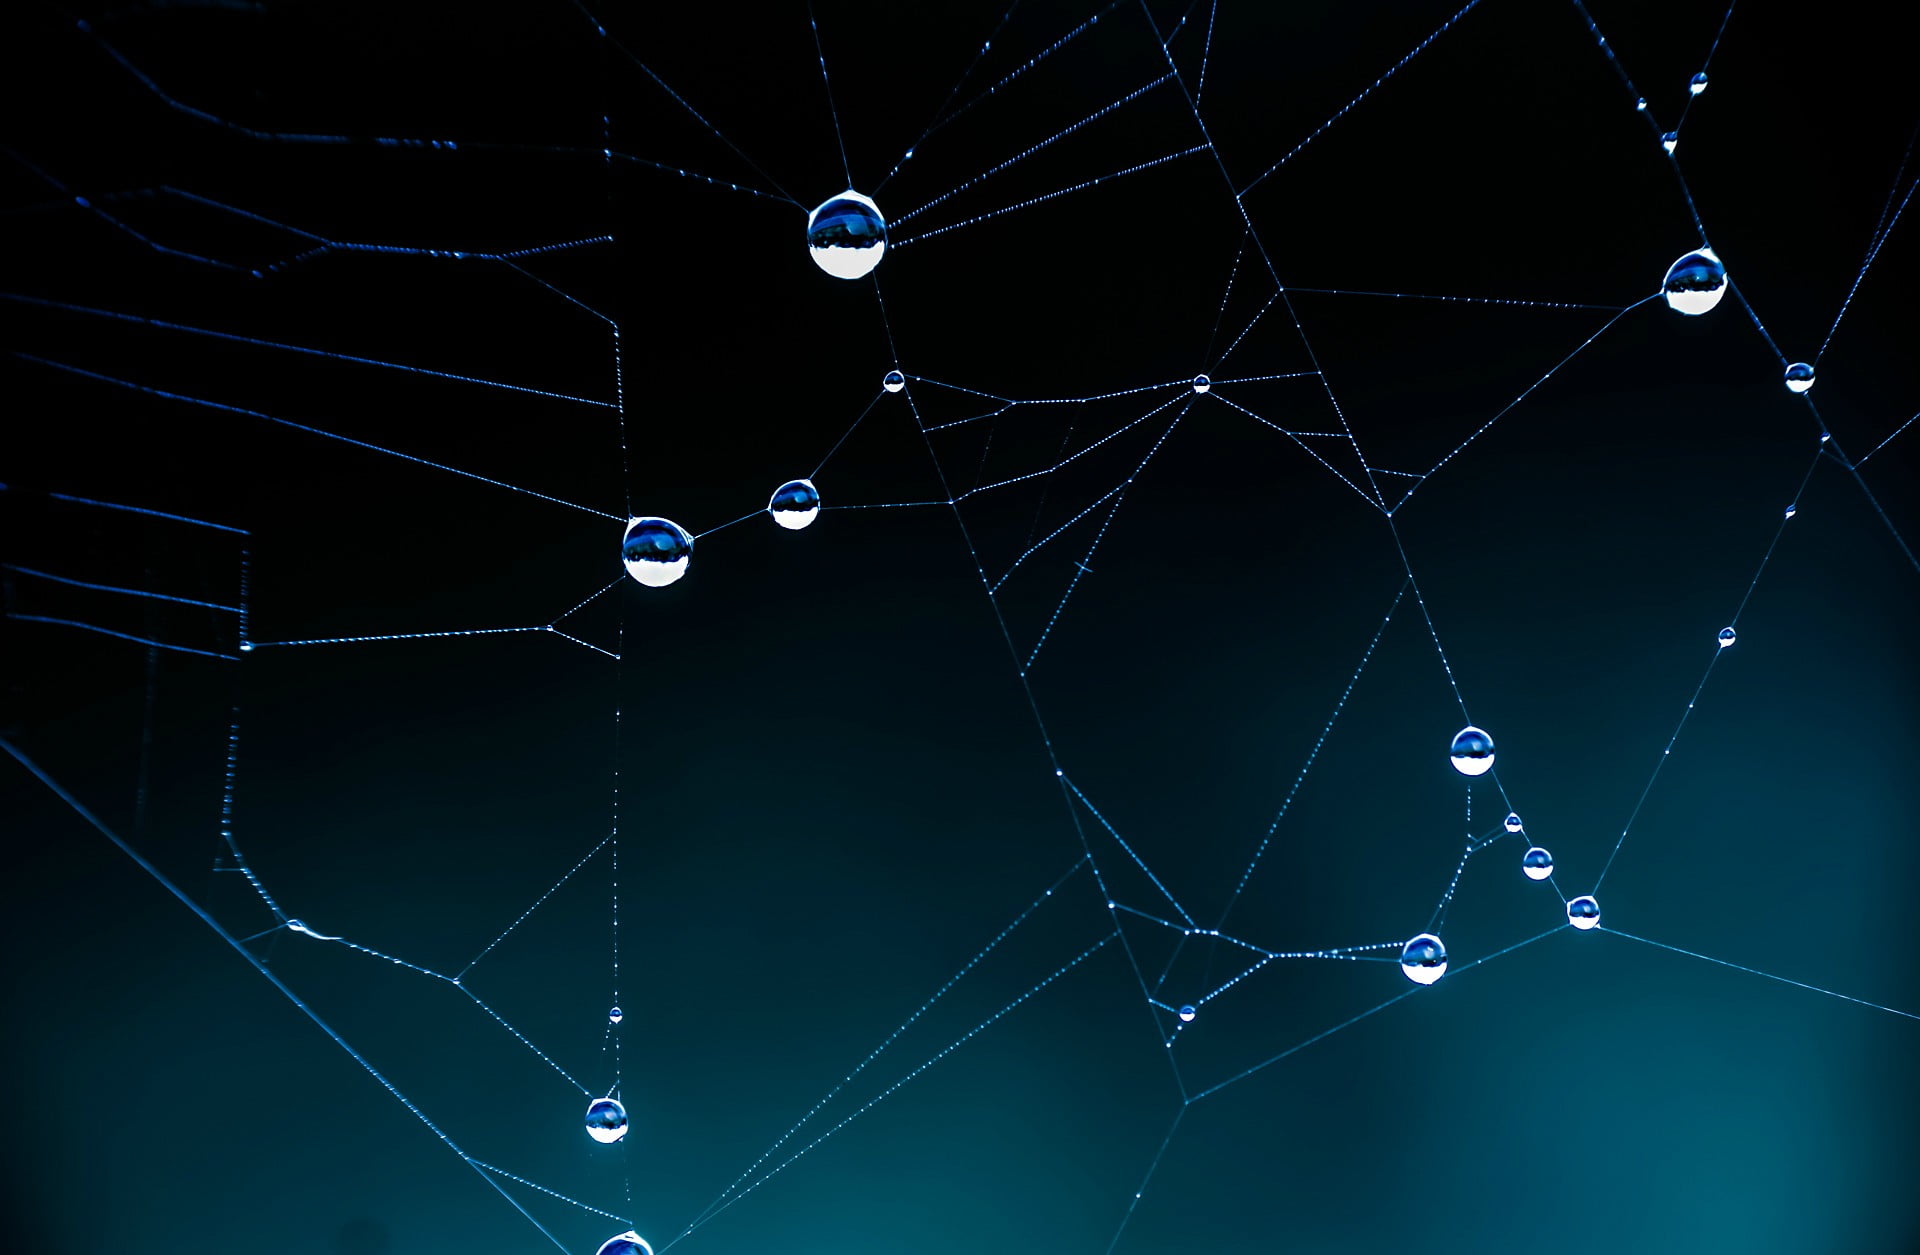 white spider web with water droplets, close view of spider web with dew drops